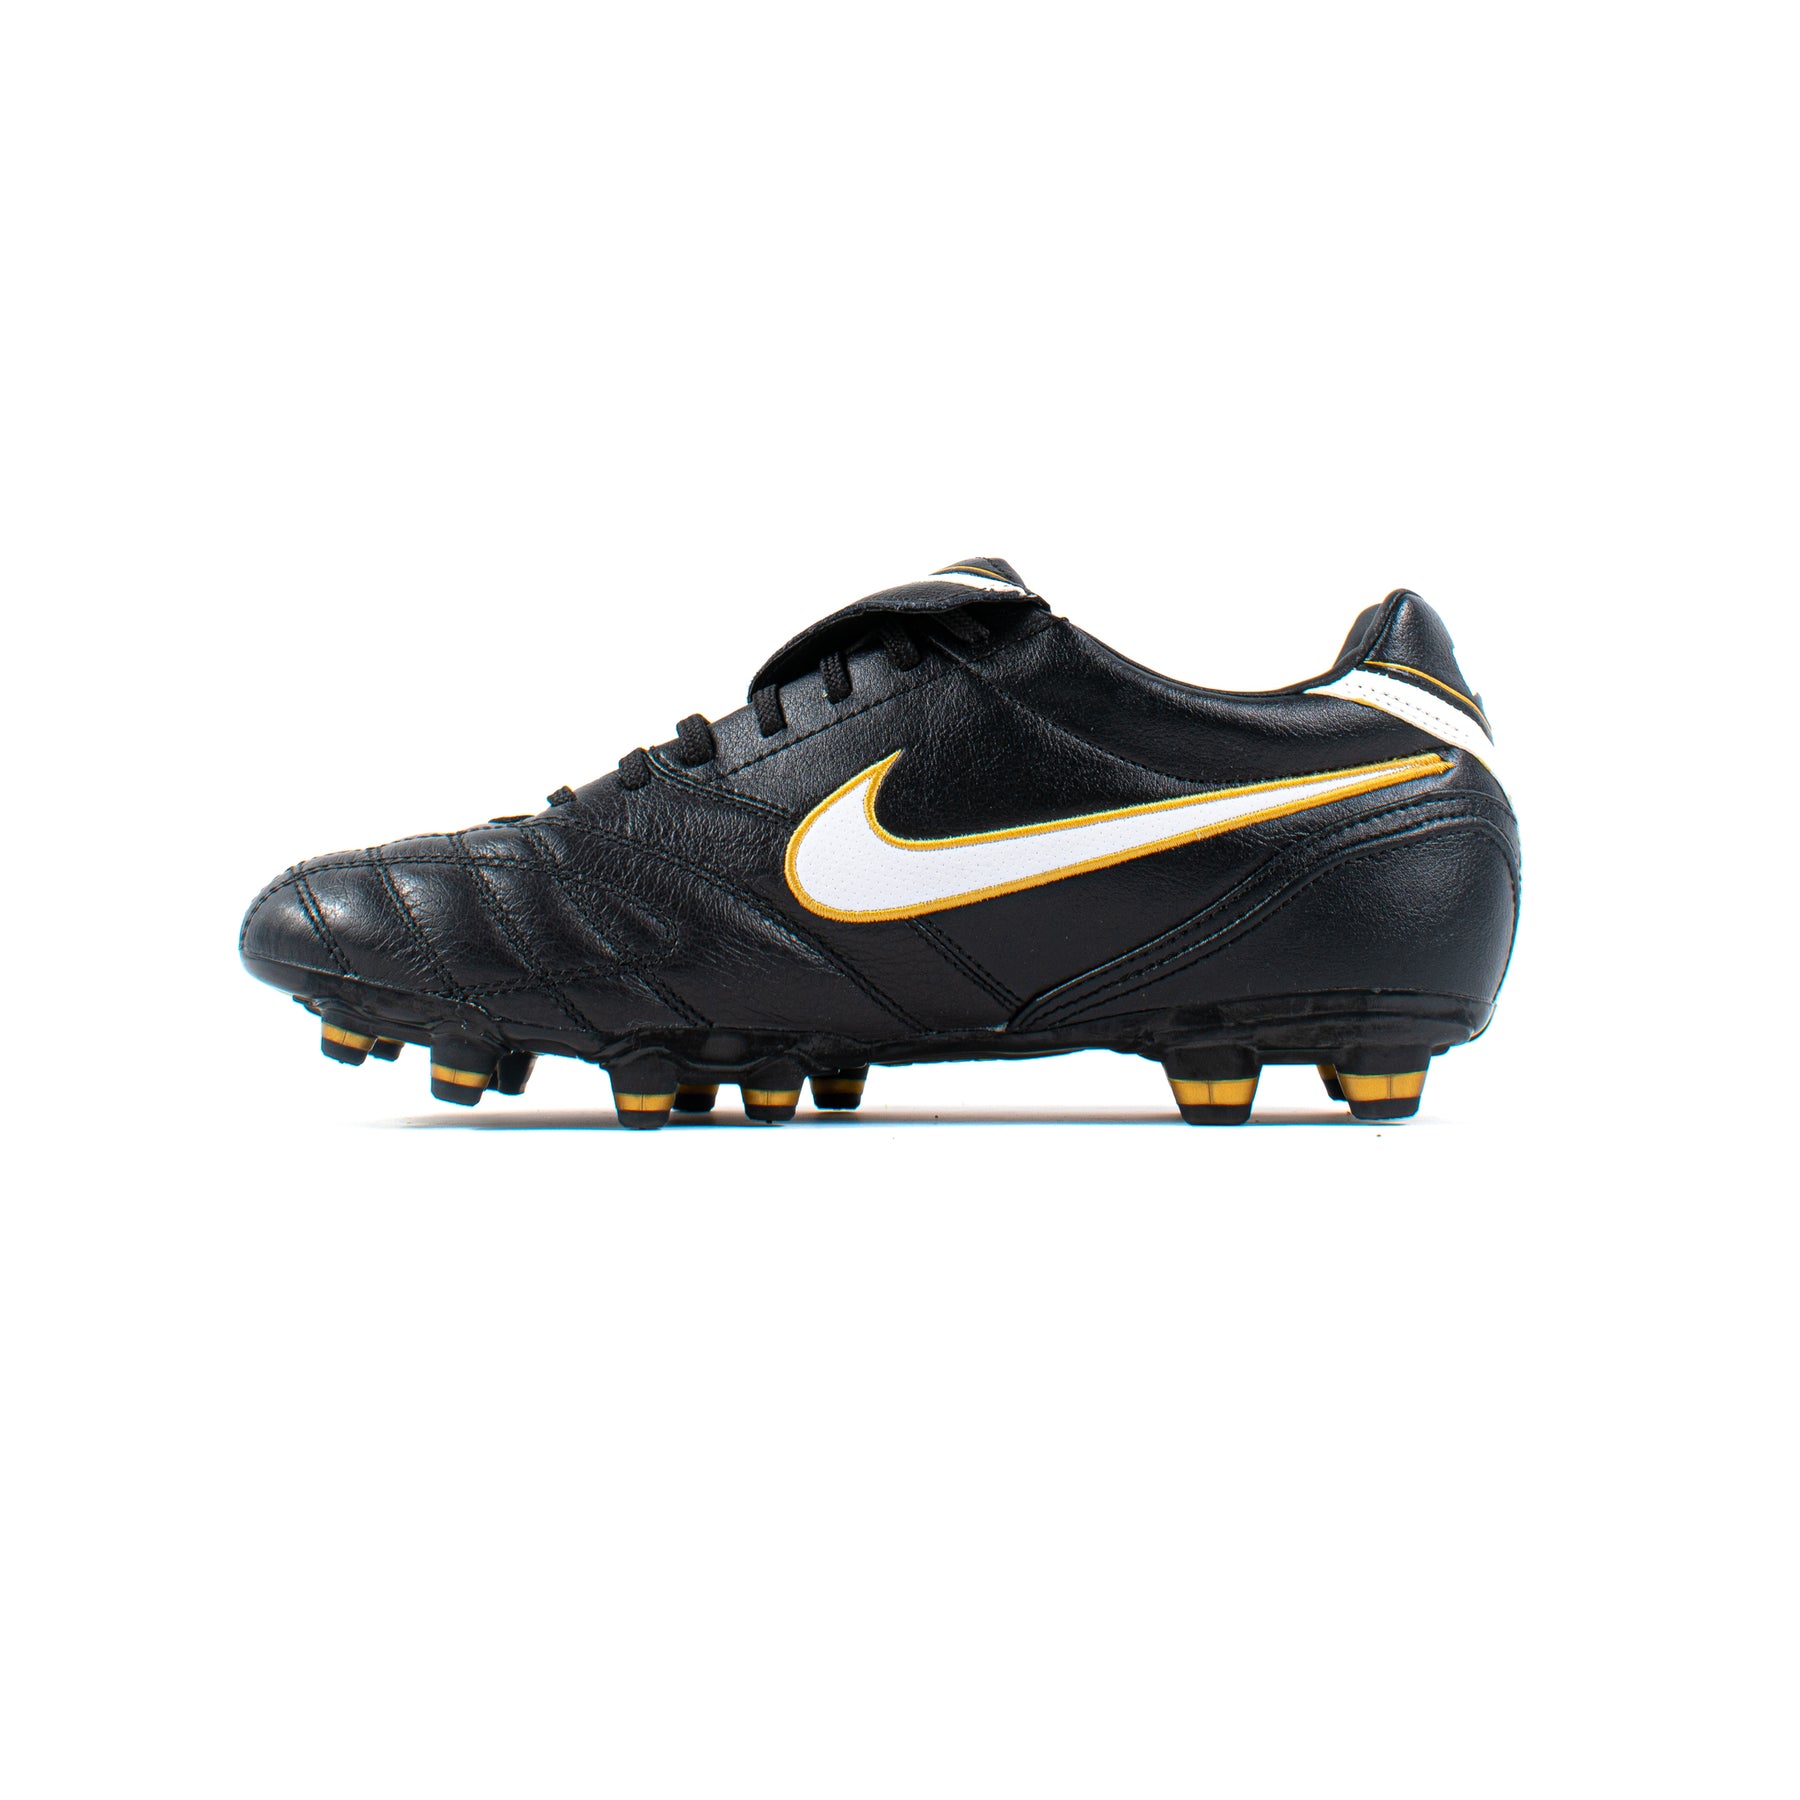 Knikken Vluchtig Anesthesie Nike Tiempo Mystic III Black Gold FG – Classic Soccer Cleats